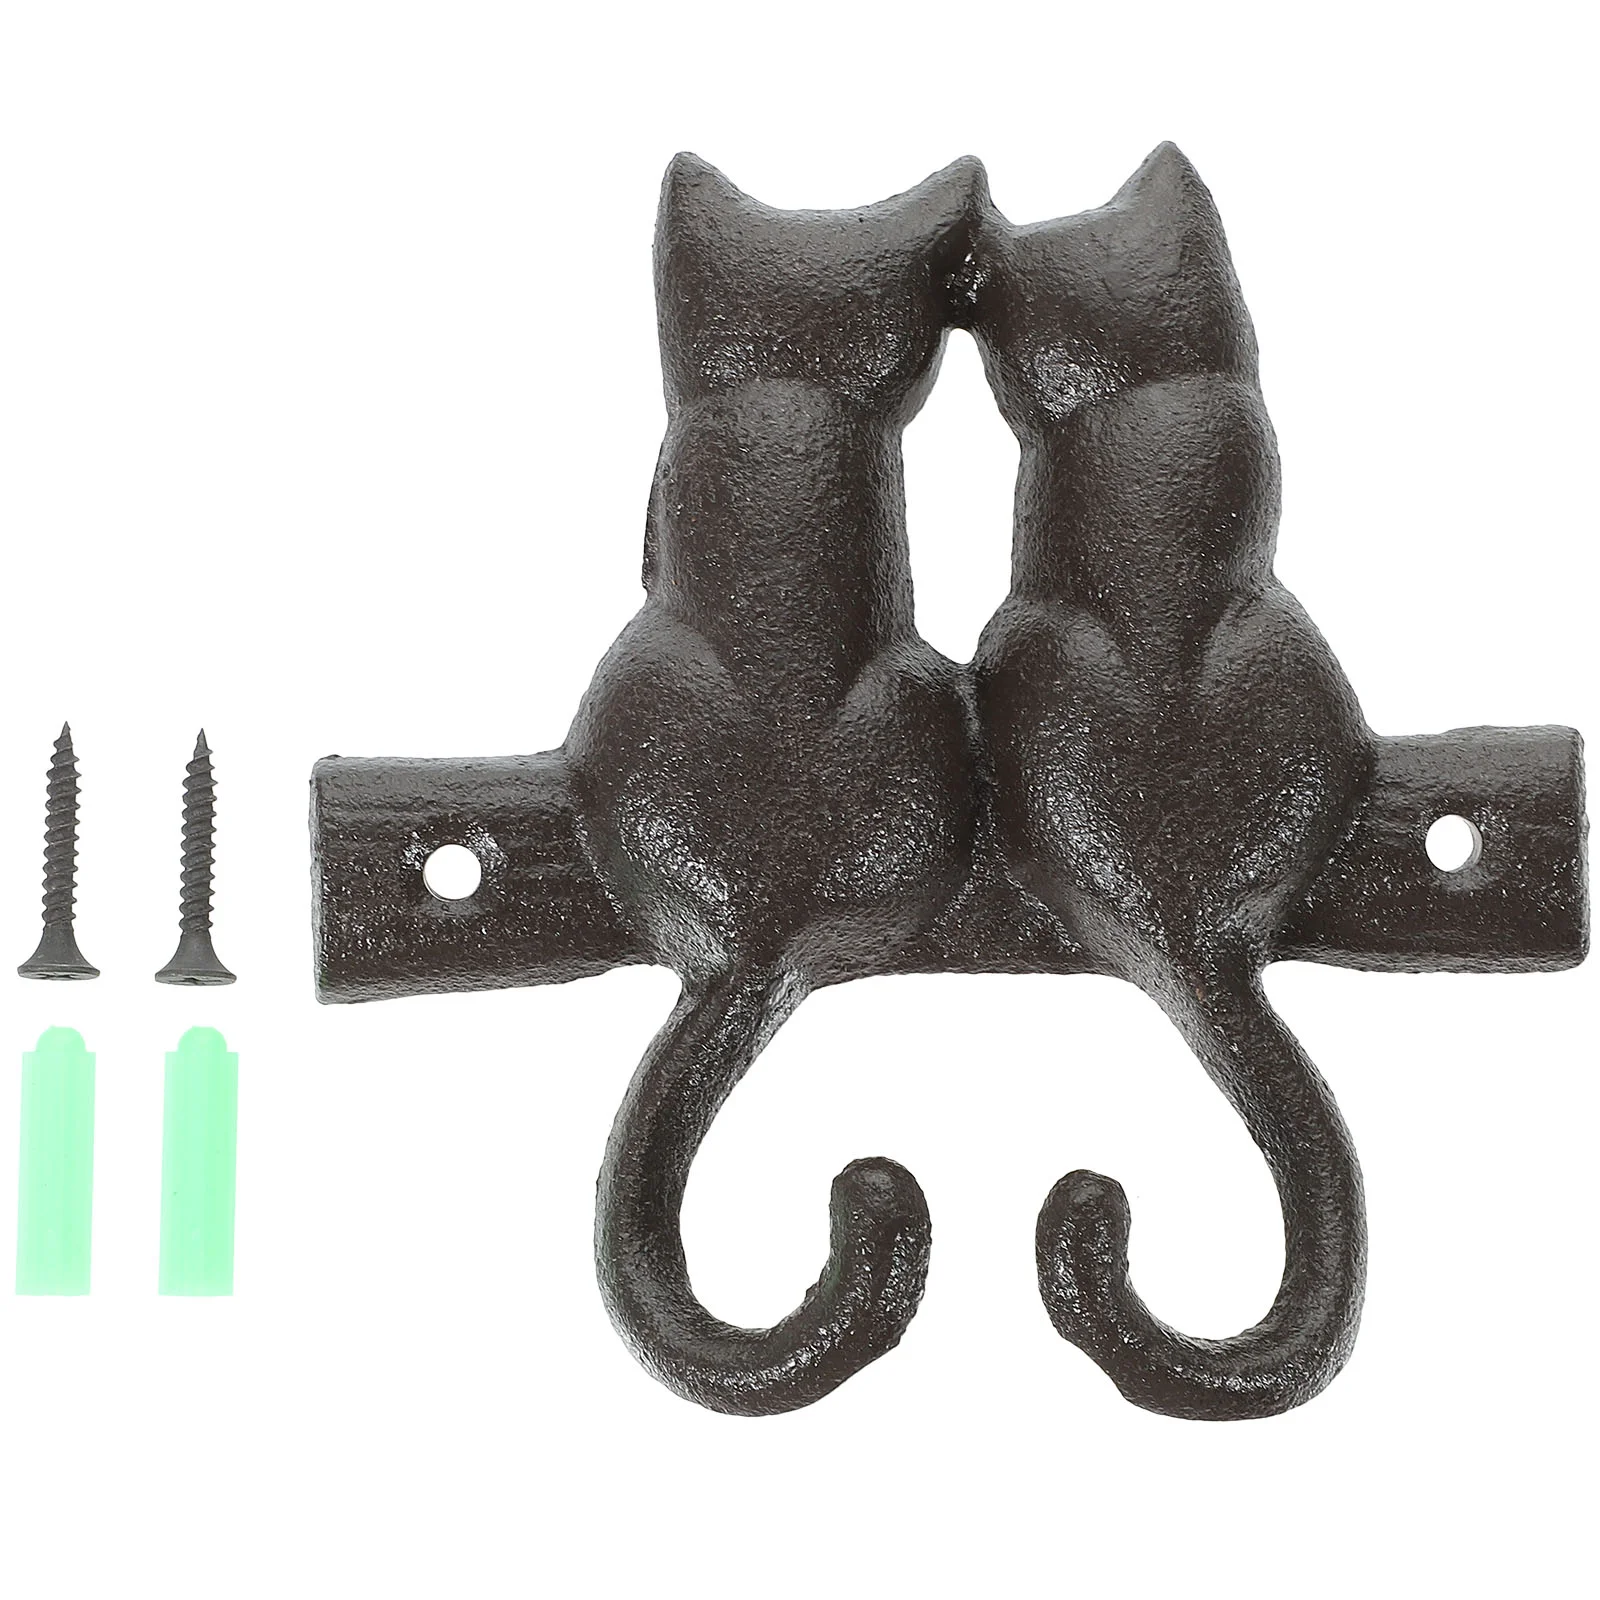 Cast Iron Hook Retro Decorative Clothing Vintage Home Cat-shaped Creative Style Rustic Hat-and-coat Clothes